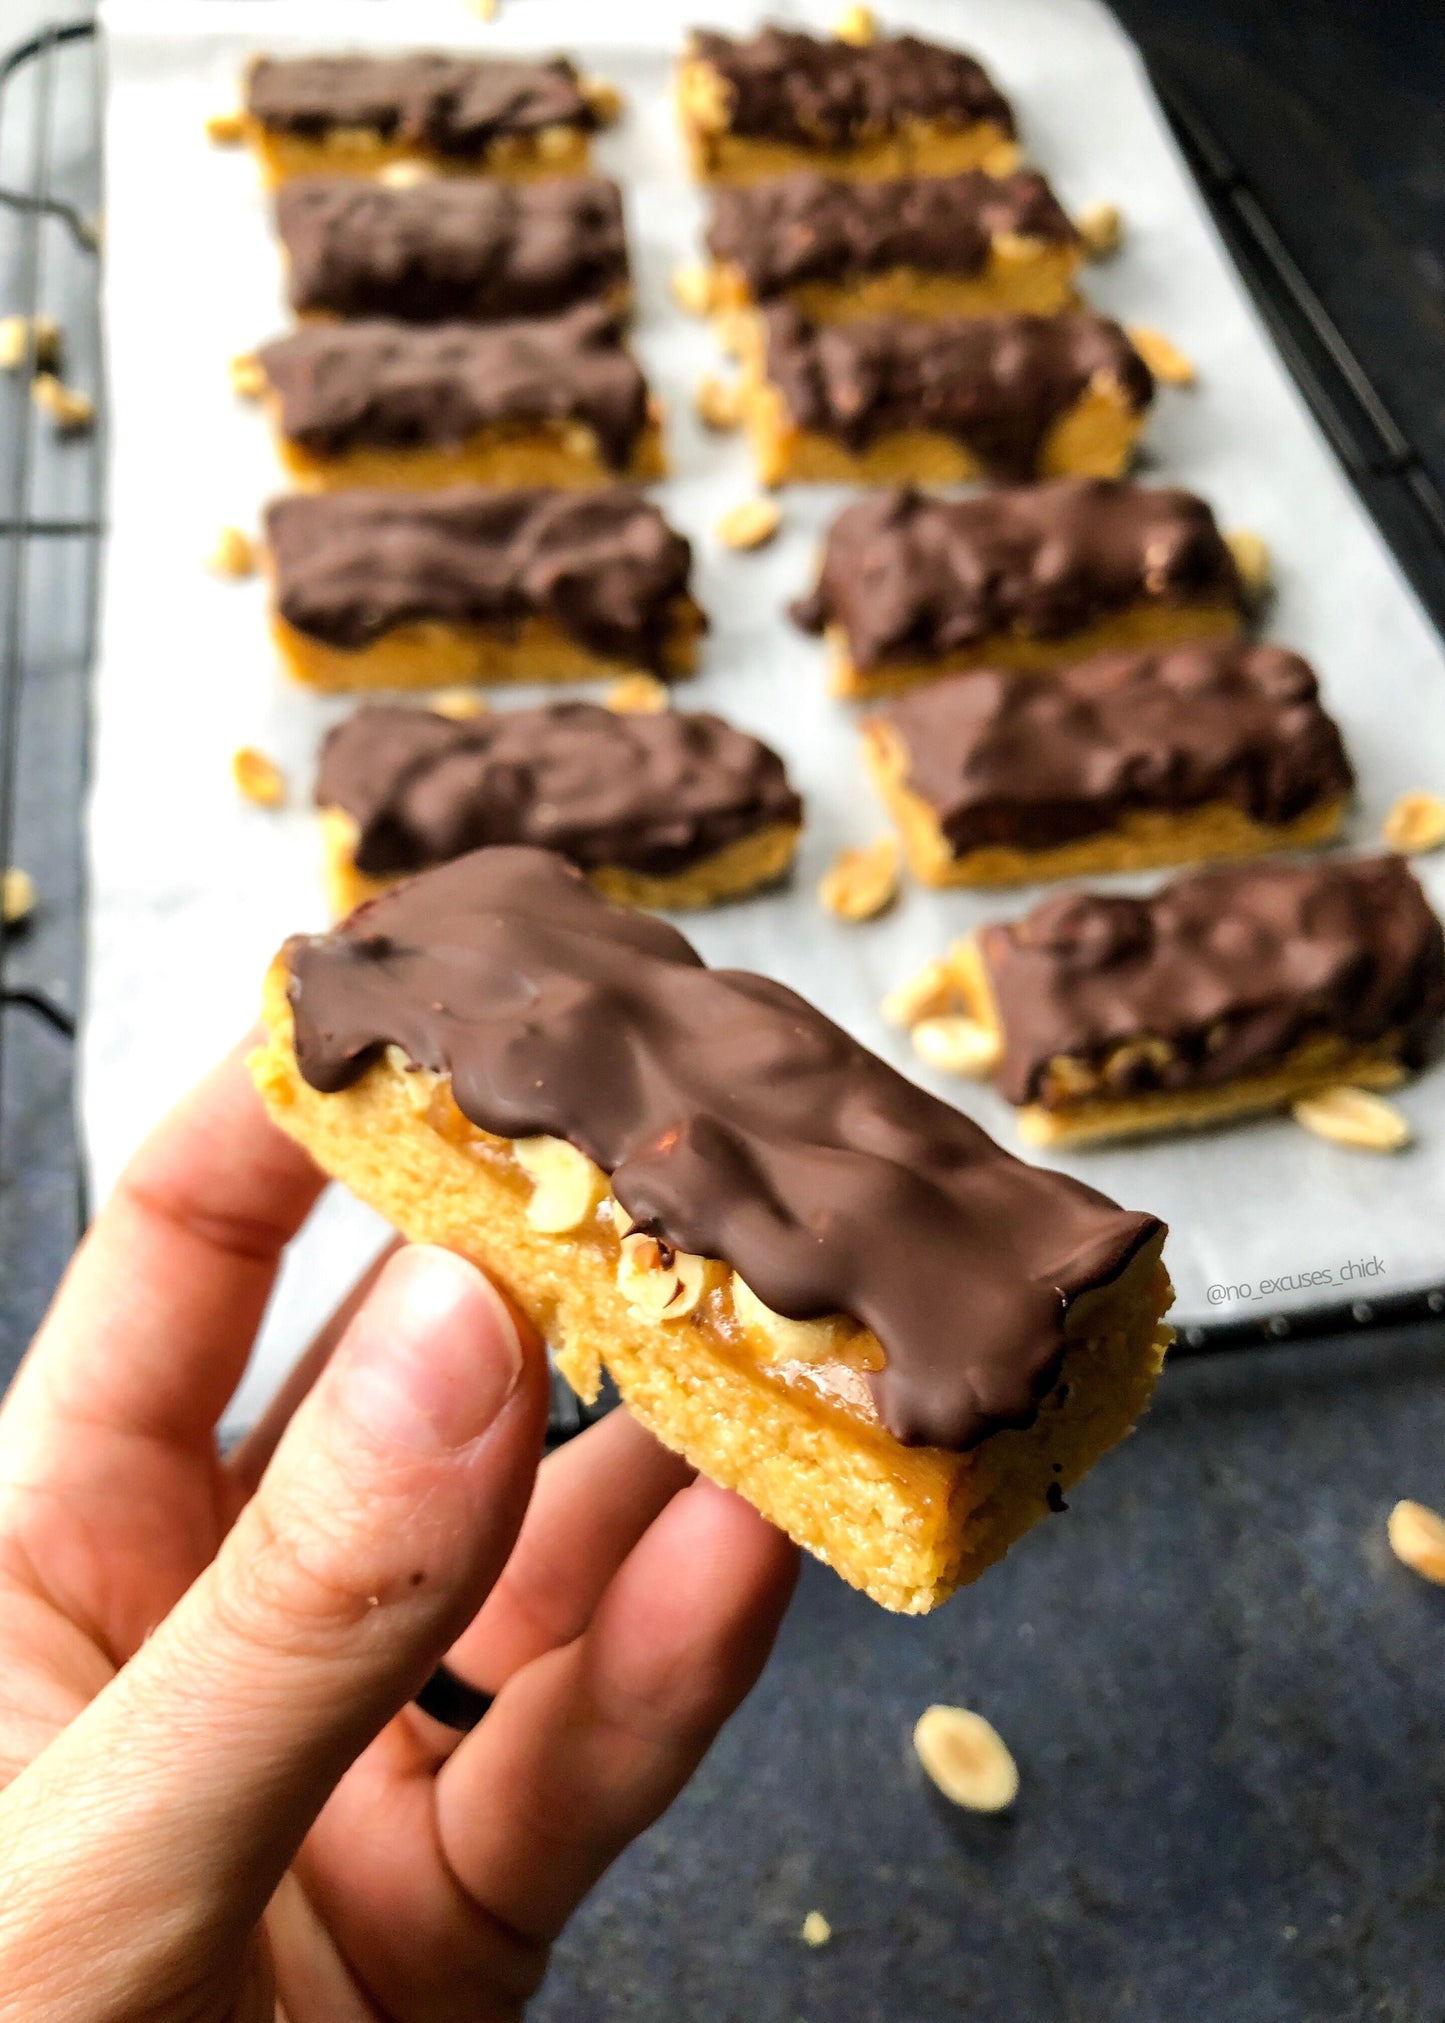 Almond chocolate bars - Ditch the candy bars